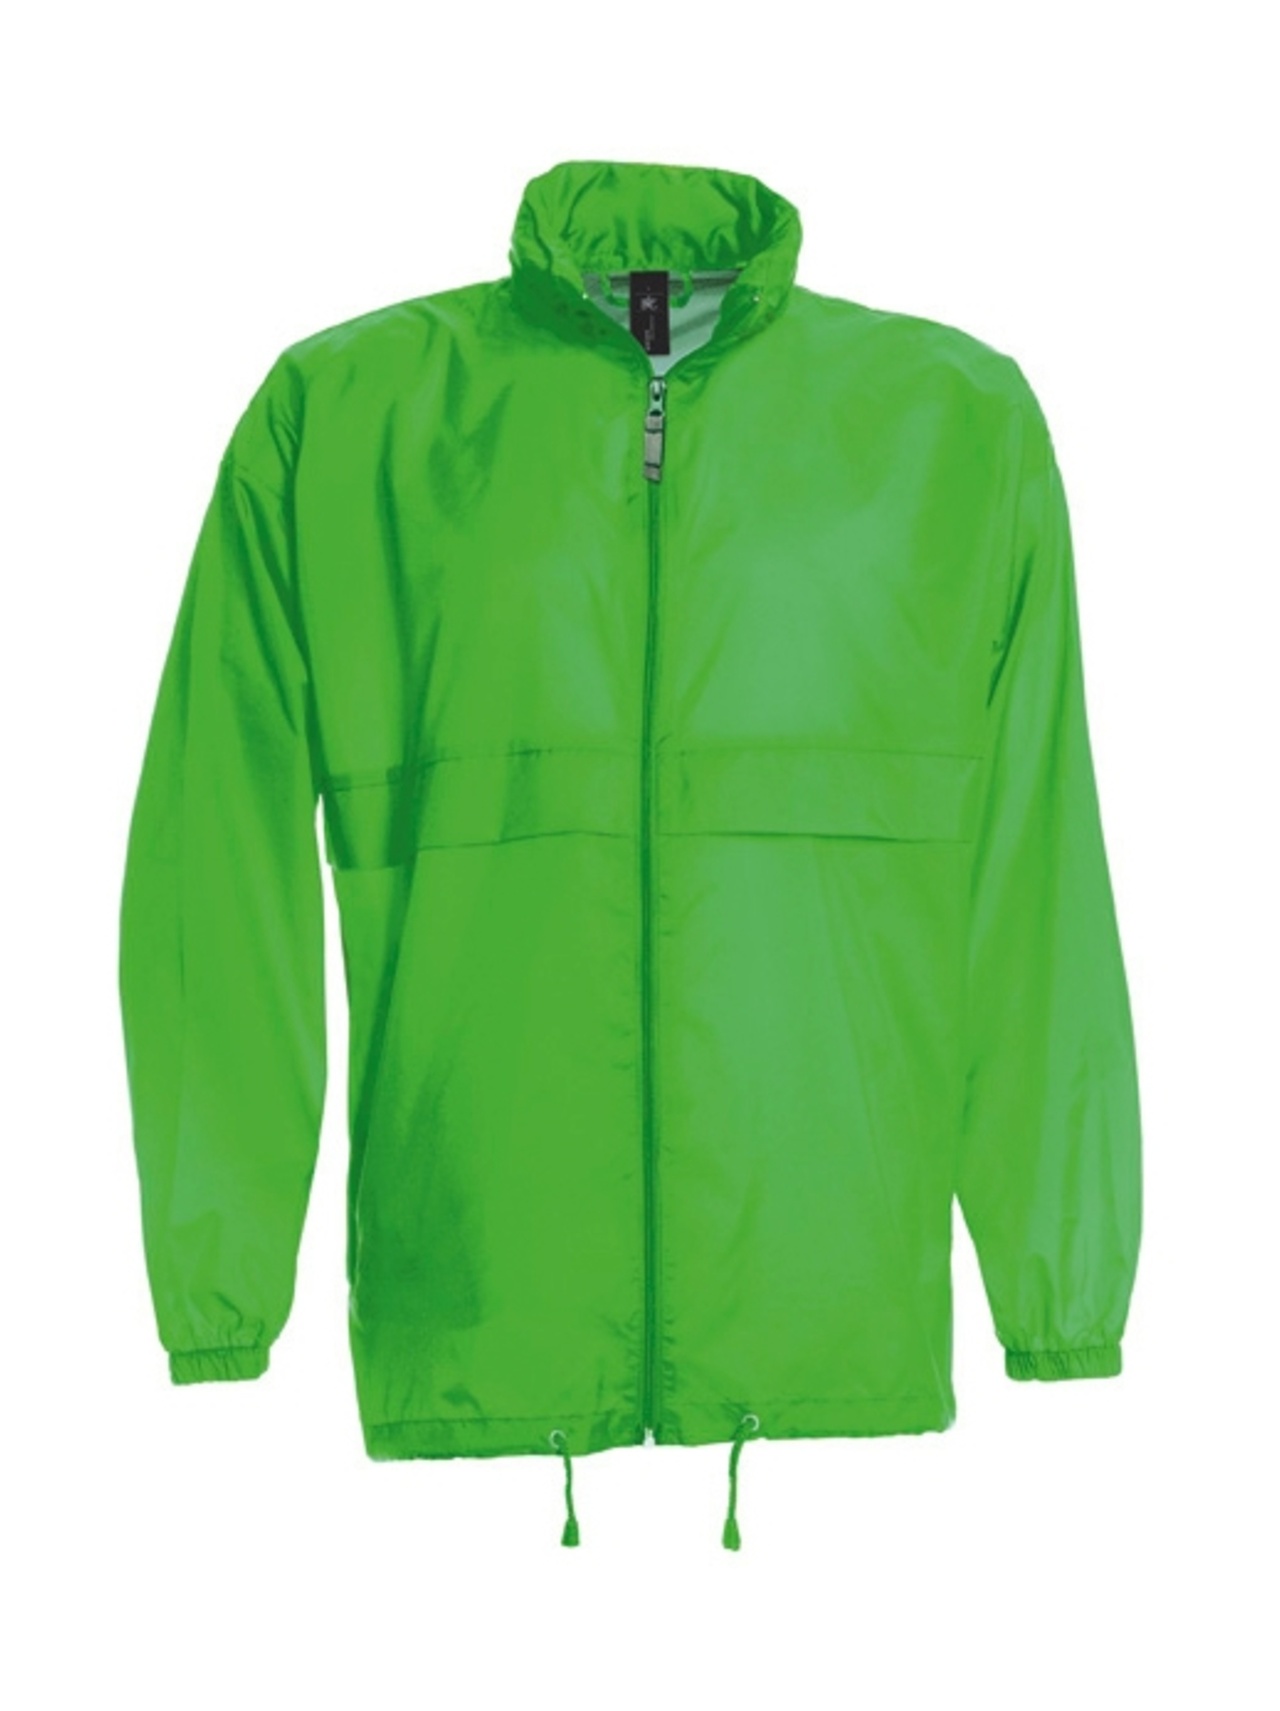 B and C Collection Sirocco - REAL GREEN - S